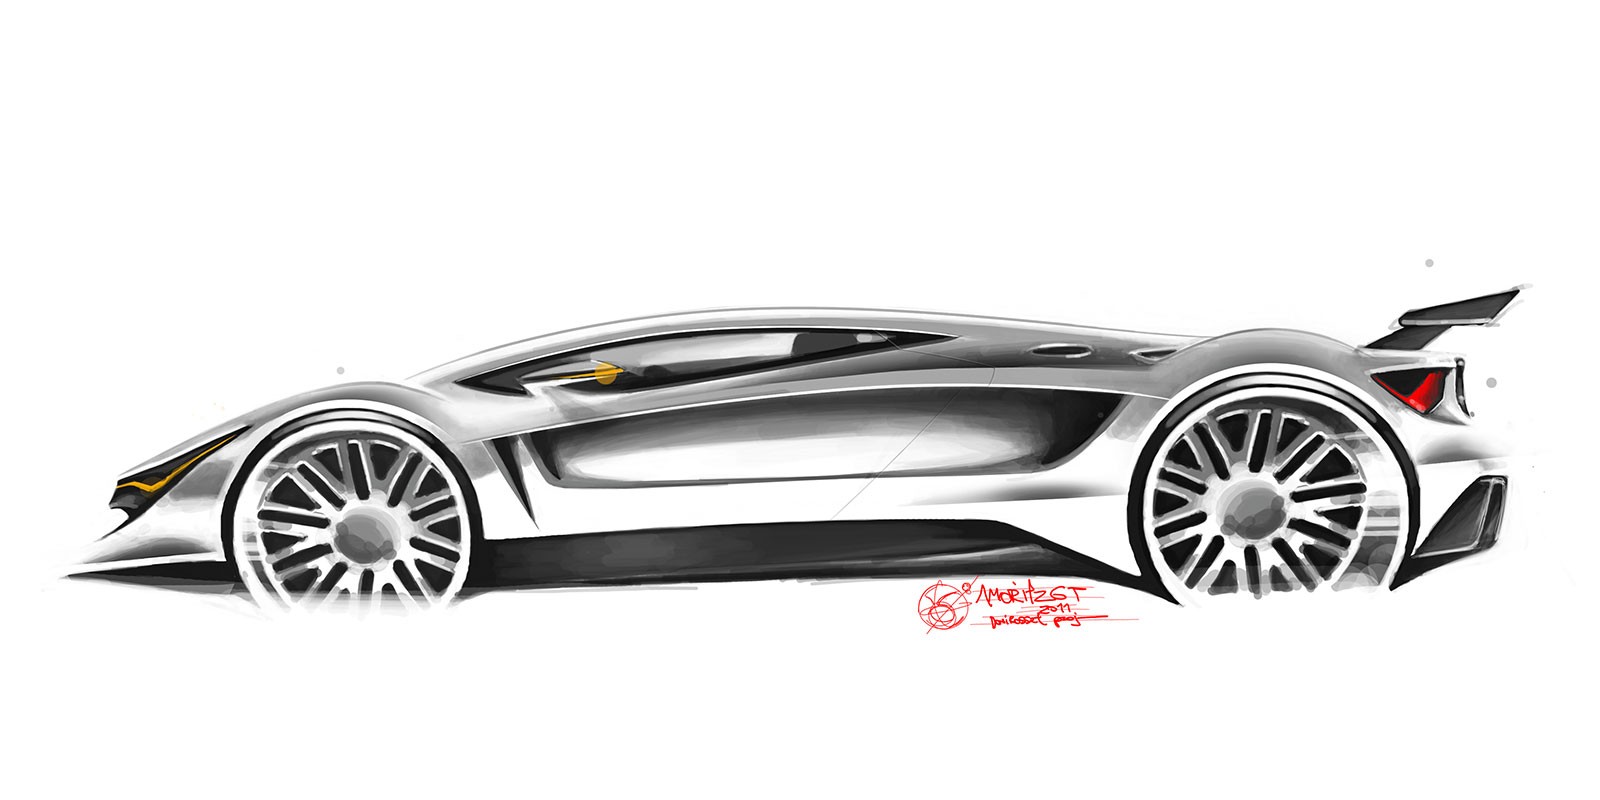 General 1600x800 car artwork vehicle simple background white background drawing silver cars